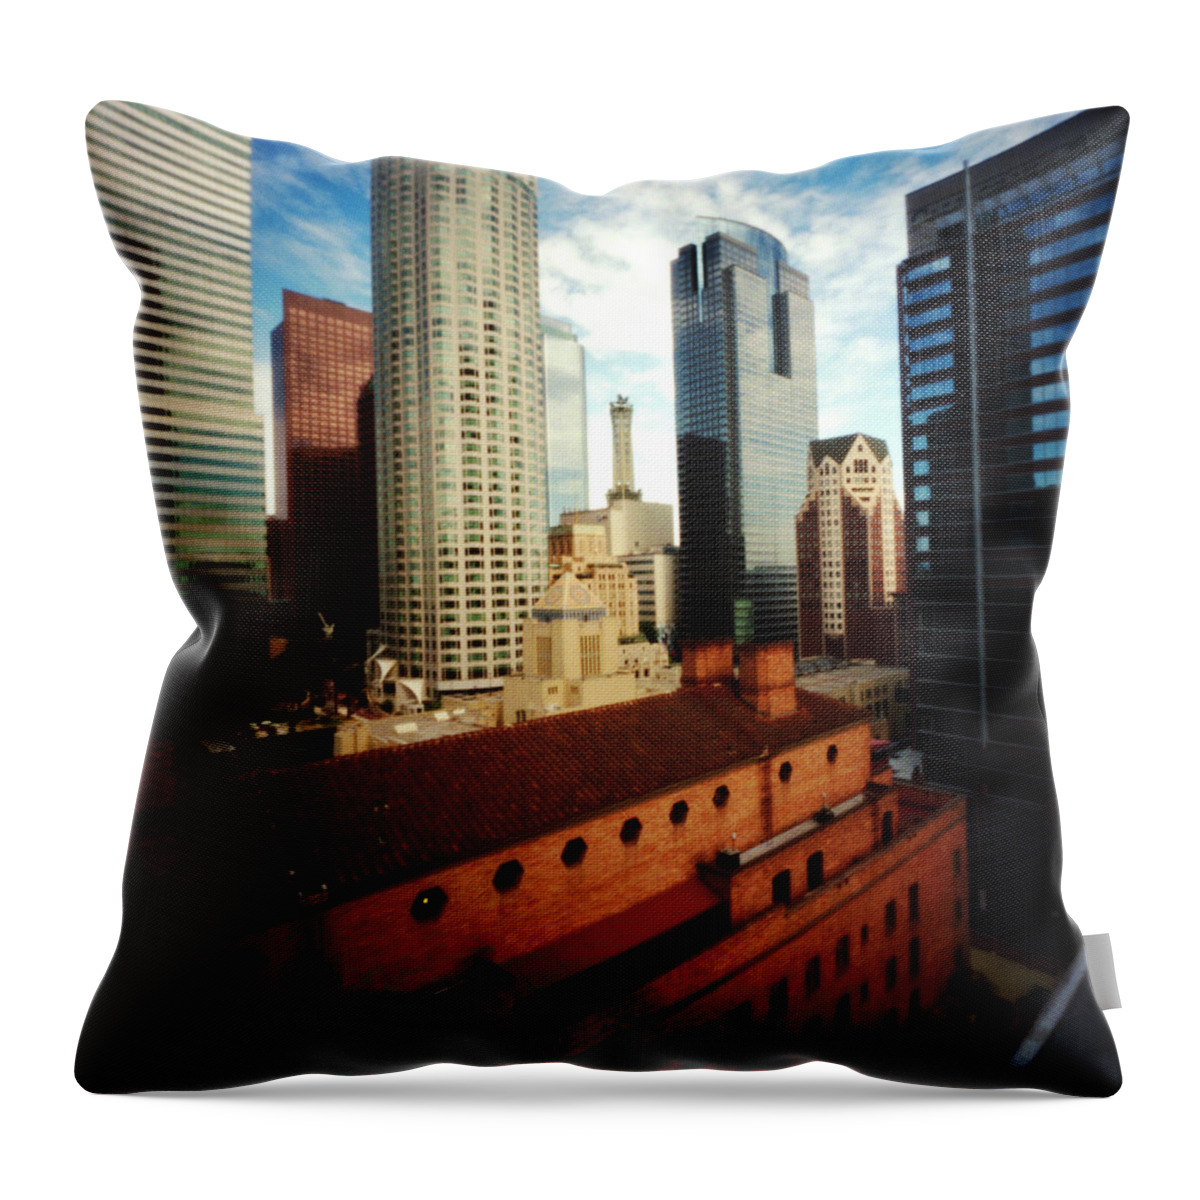 Pinhole Throw Pillow featuring the photograph Pinhole Los Angeles Cityscape by Hugh Smith